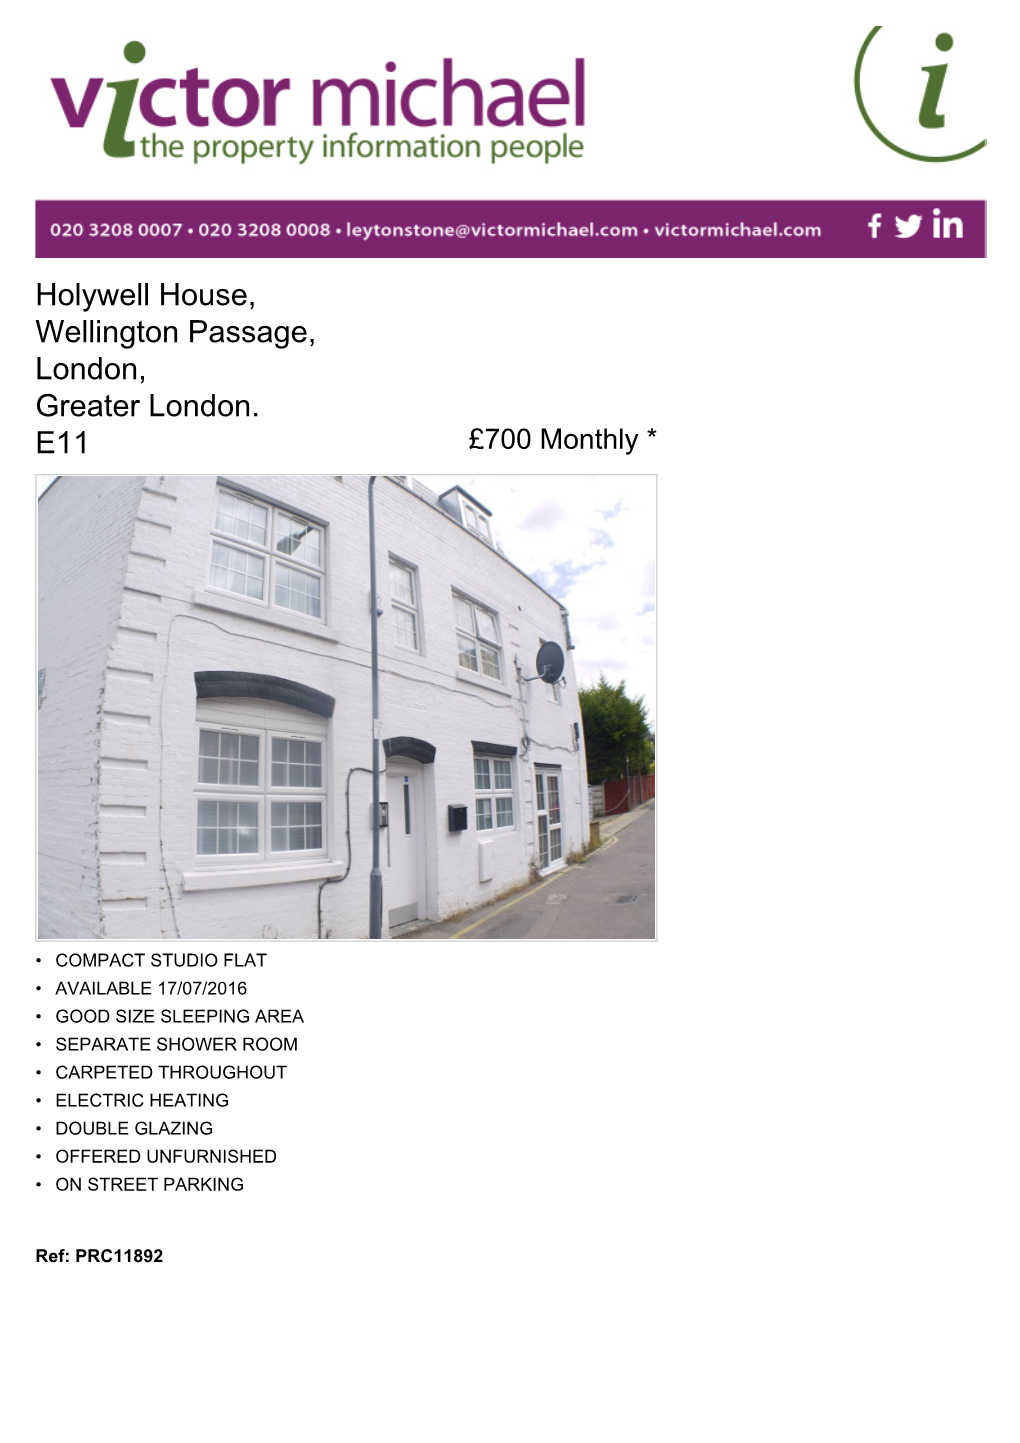 Holywell House, Wellington Passage, London, Greater London. E11 £700 Monthly *